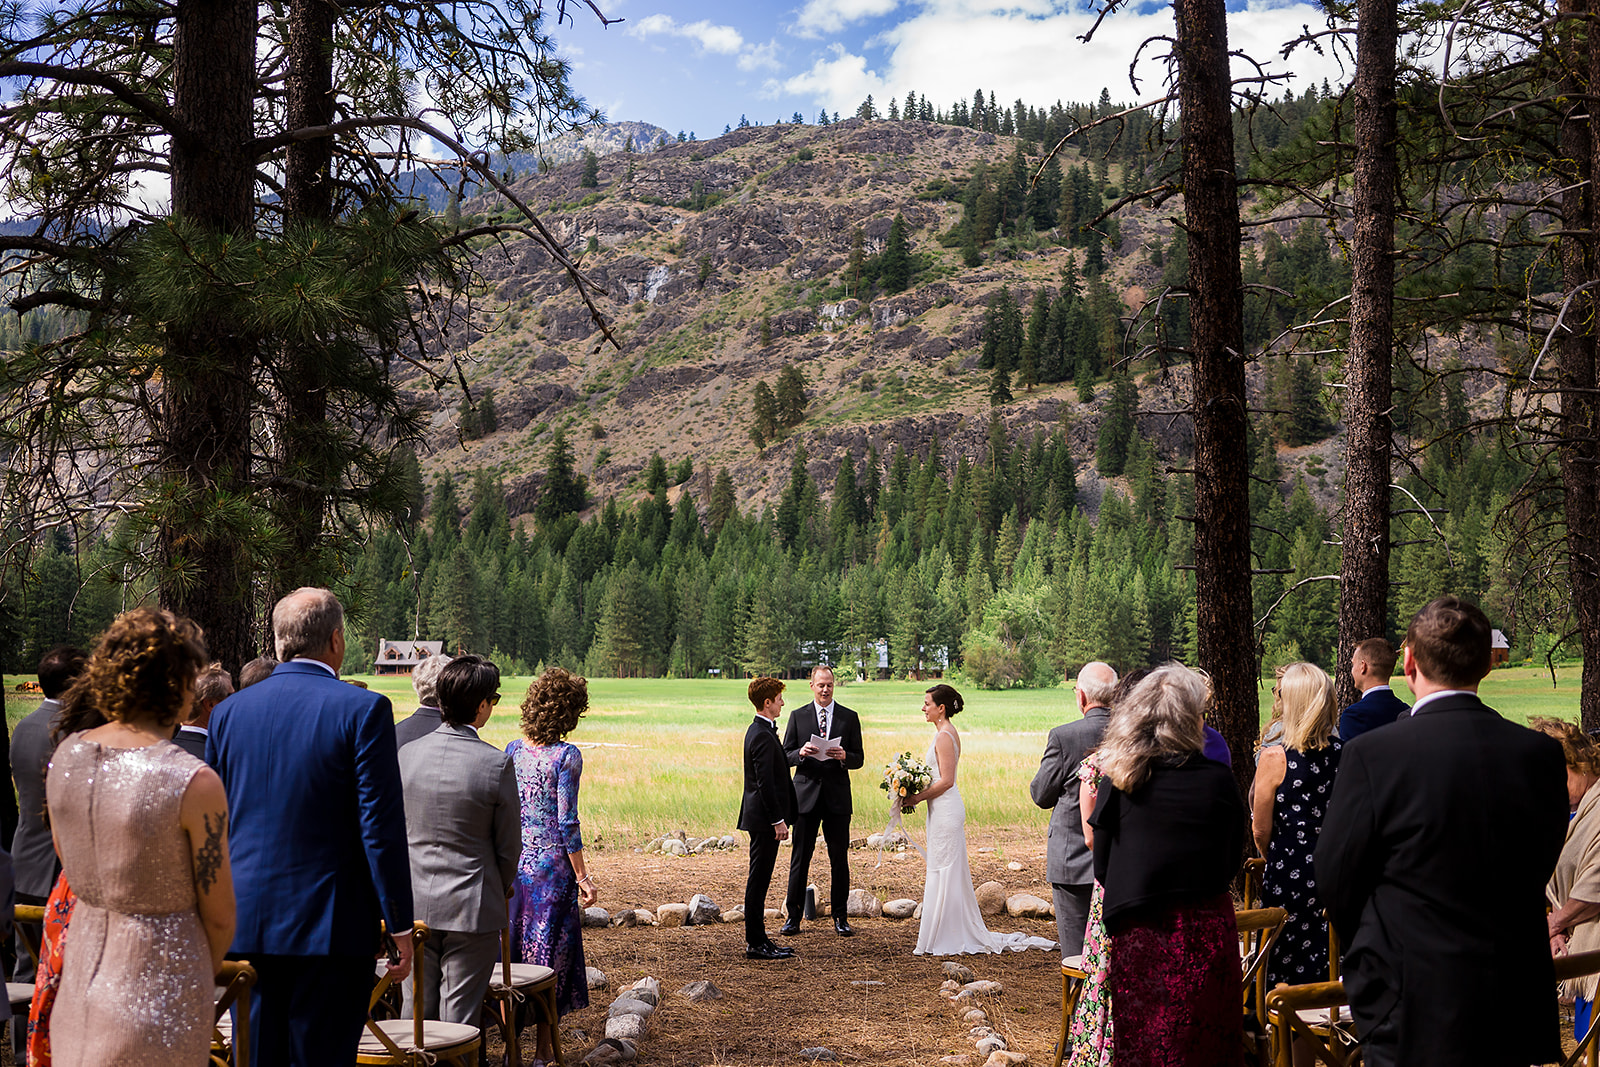 Mazama Ranch House Wedding ceremony location with mountains as the backdrop